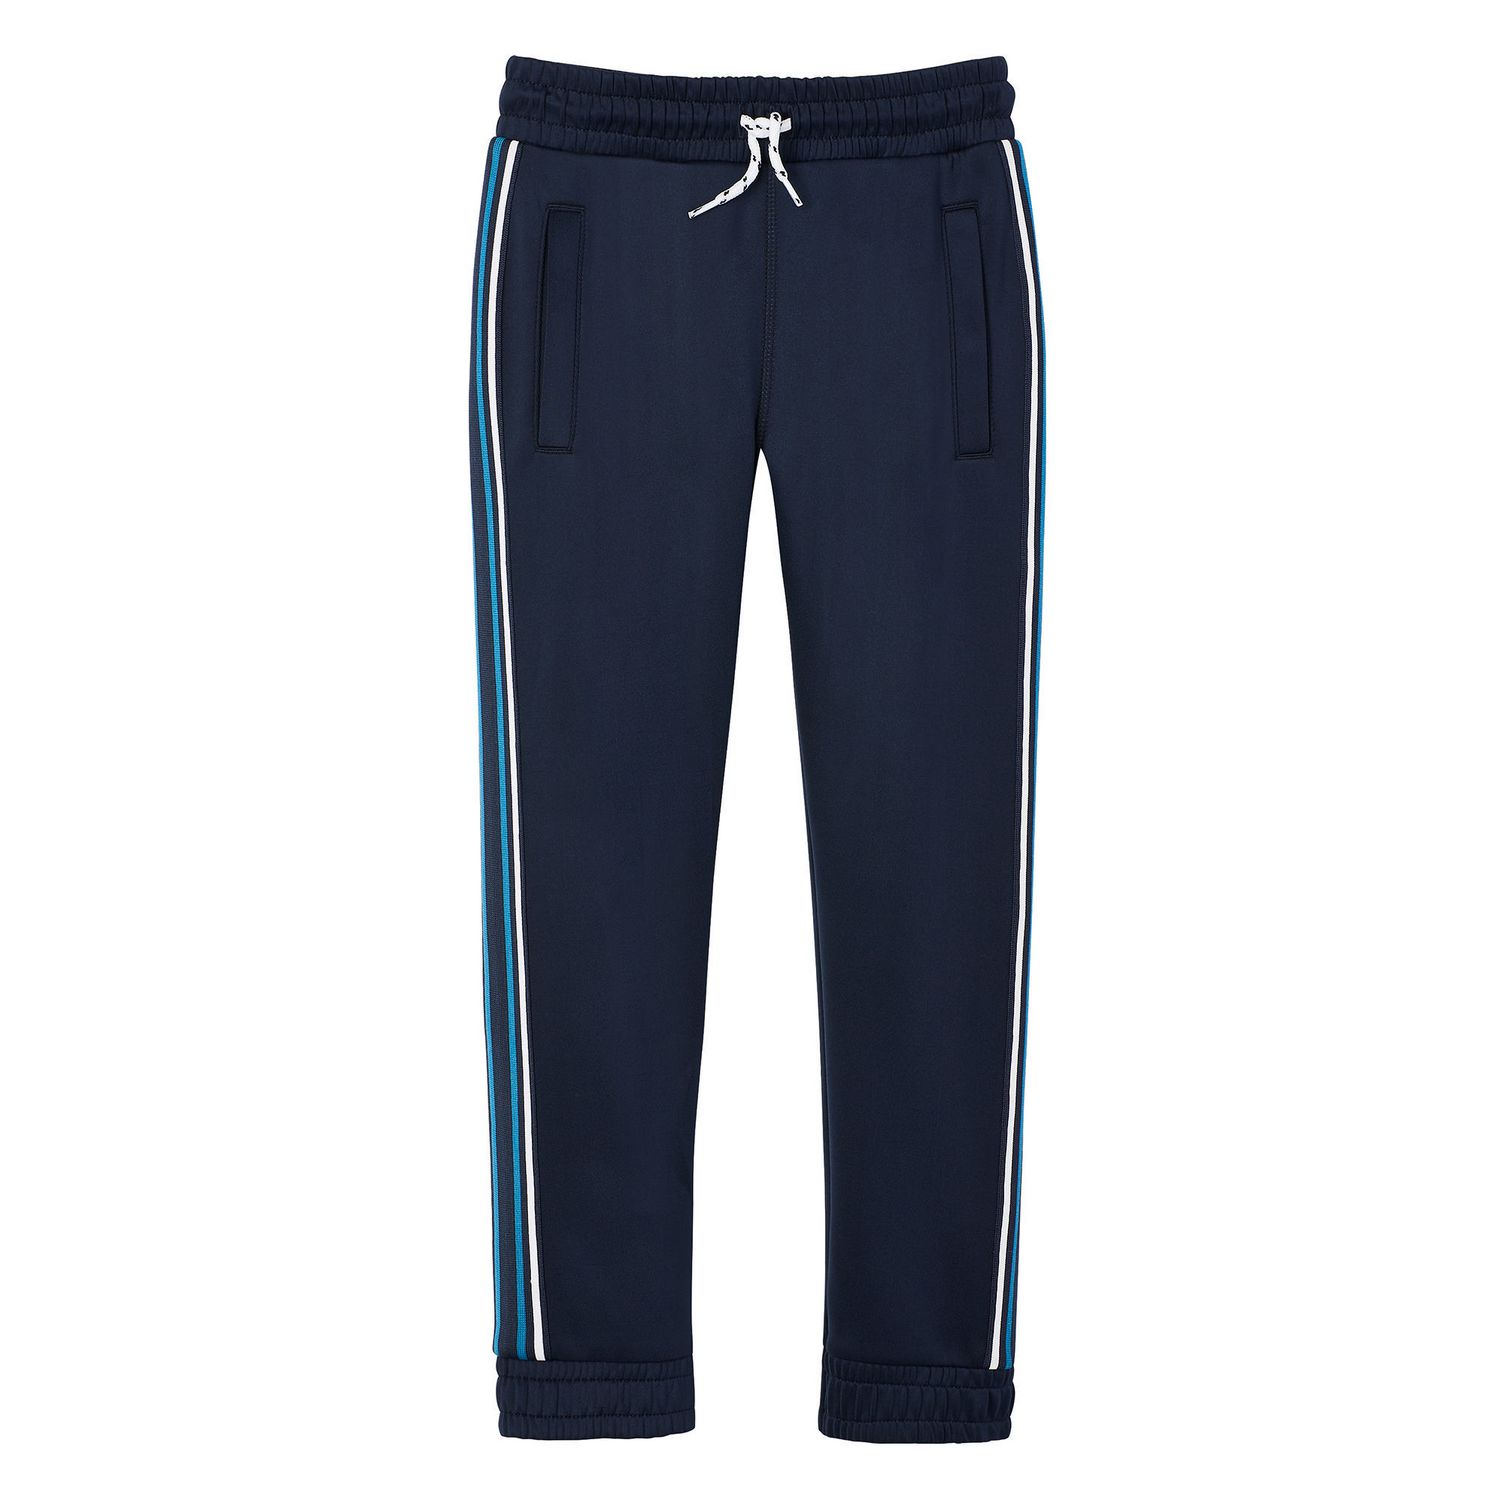 George Boys' Track Pant with Taping | Walmart Canada